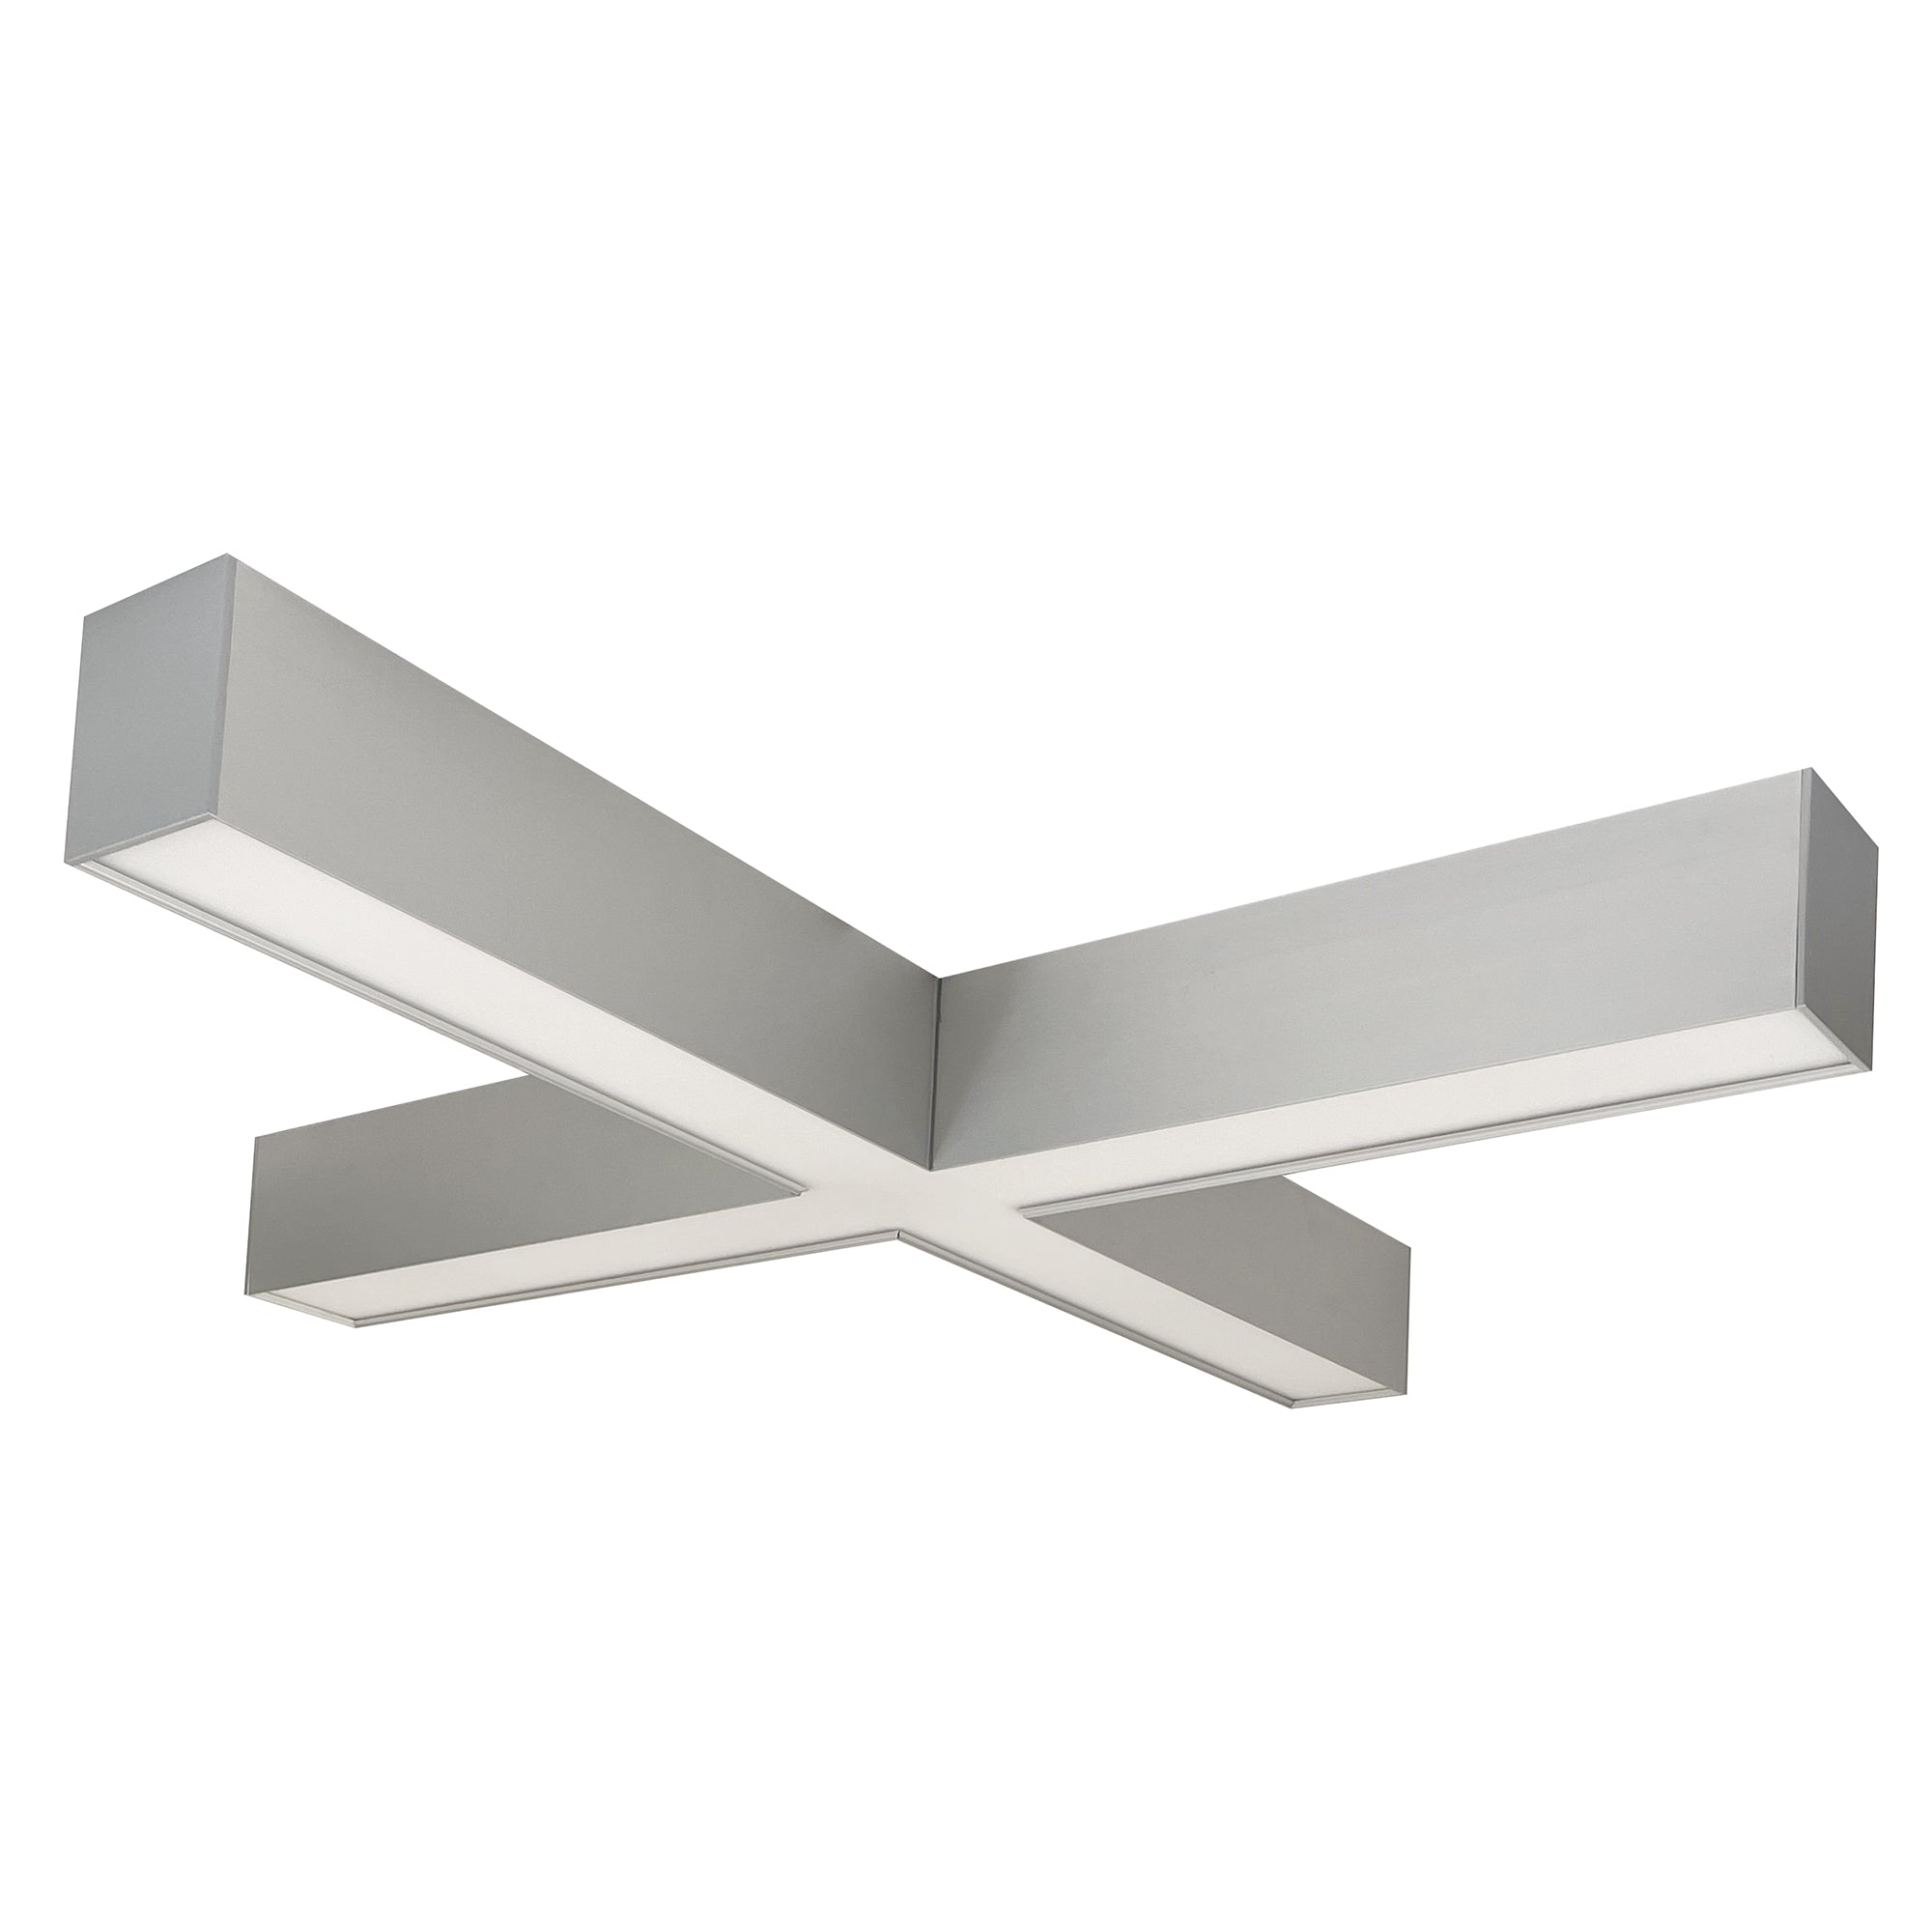 Nora Lighting NLUD-X334A - Linear -  InchX Inch Shaped L-Line LED Indirect/Direct Linear, 6028lm / Selectable CCT, Aluminum finish